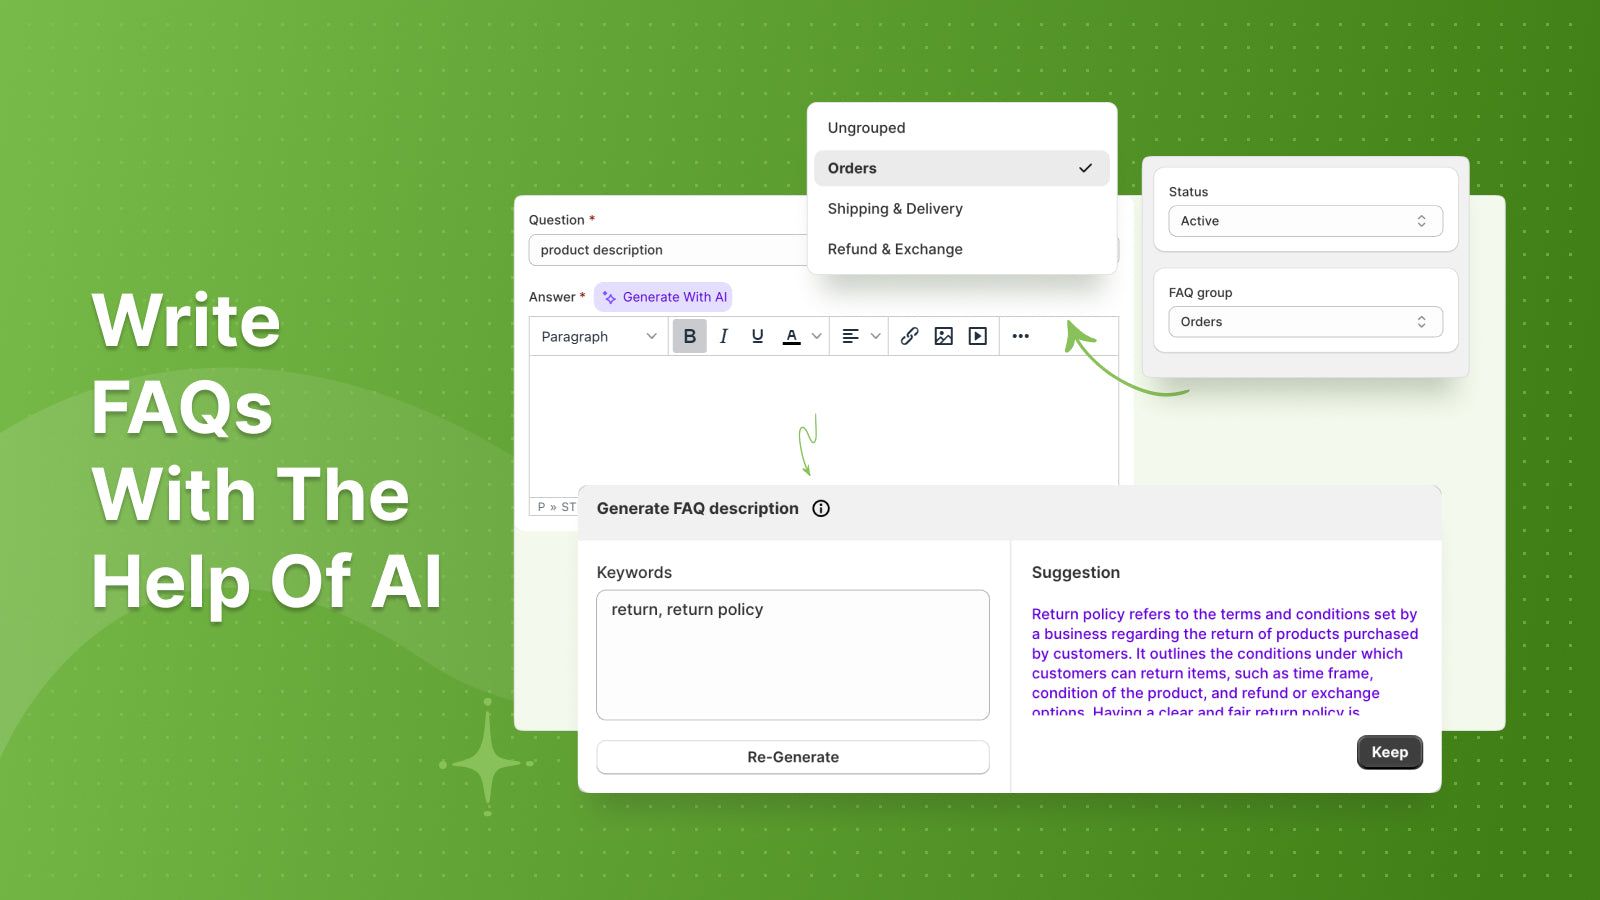 Write FAQs With The Help Of AI